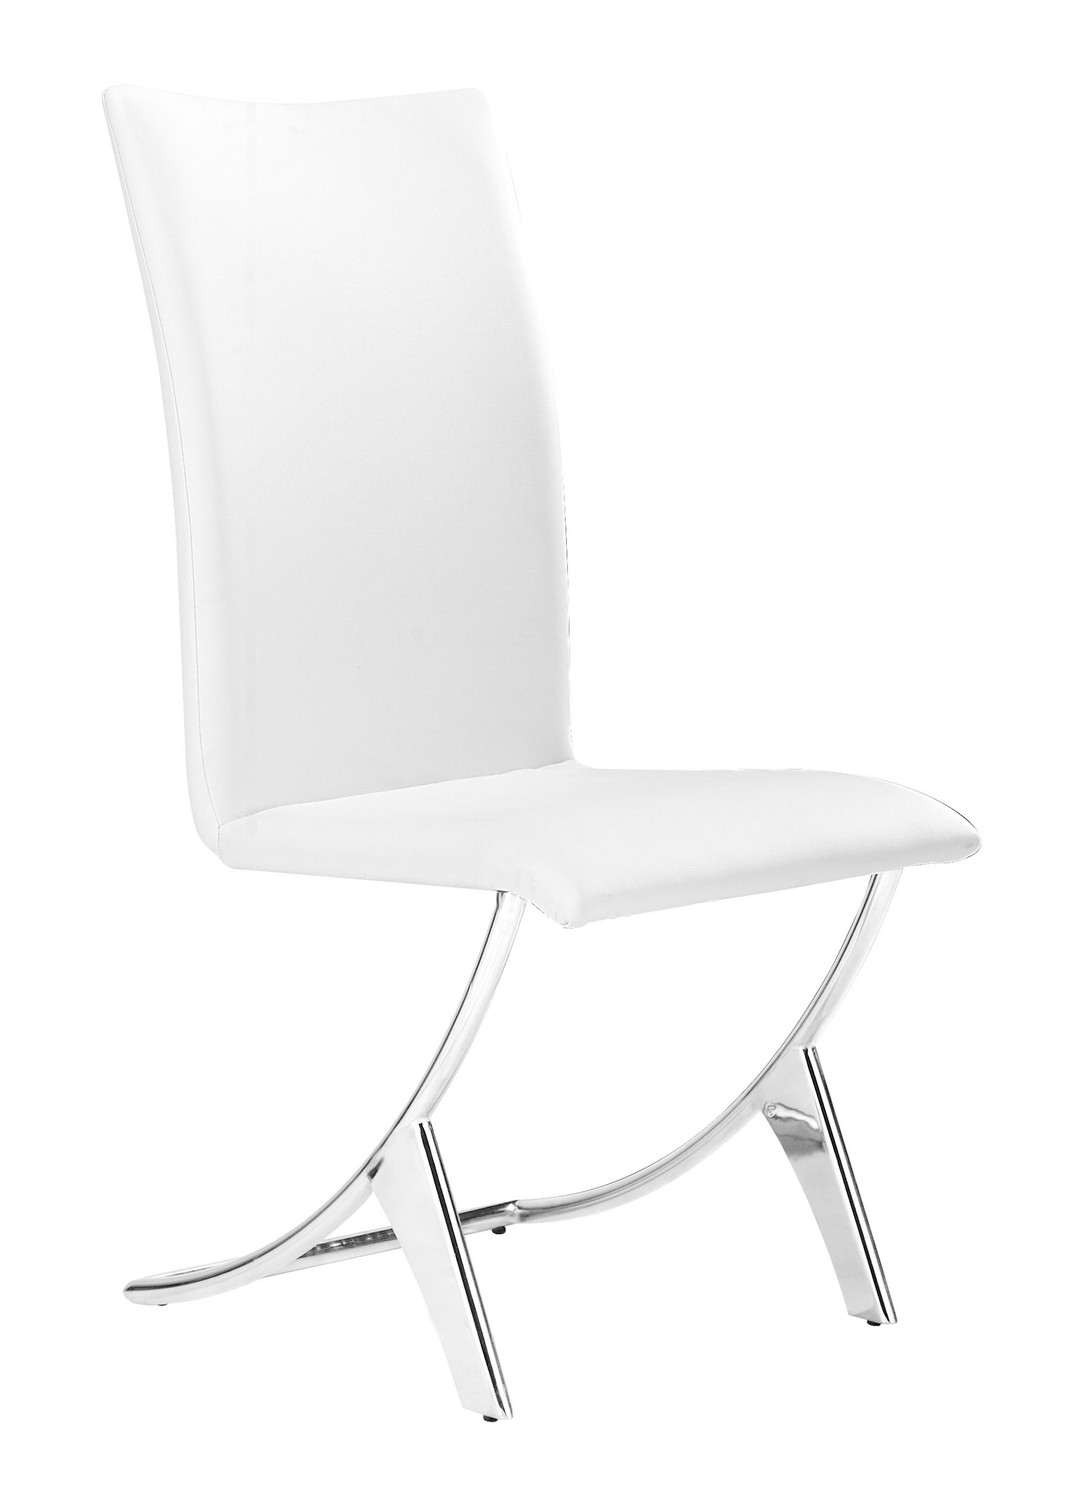 17" x 26" x 39" White, Leatherette, Chromed Steel, Dining Chair - Set of 2